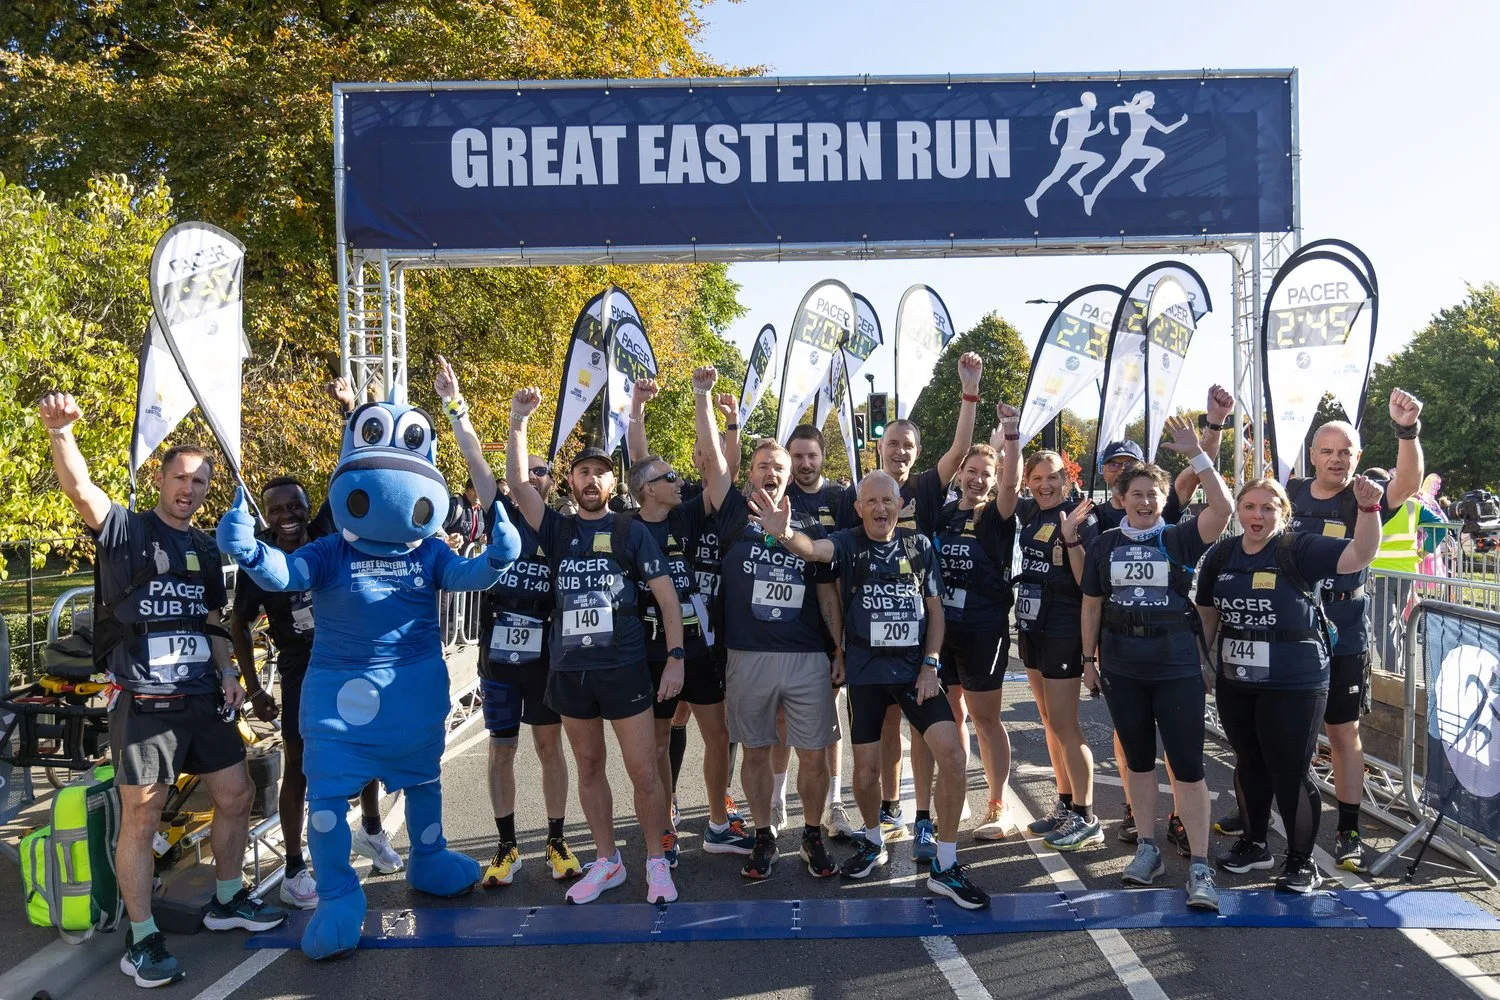 This year's Great Eastern Run route on October 15 starts on the Embankment and progresses on to Werrington, before looping back and finishing in the city centre.